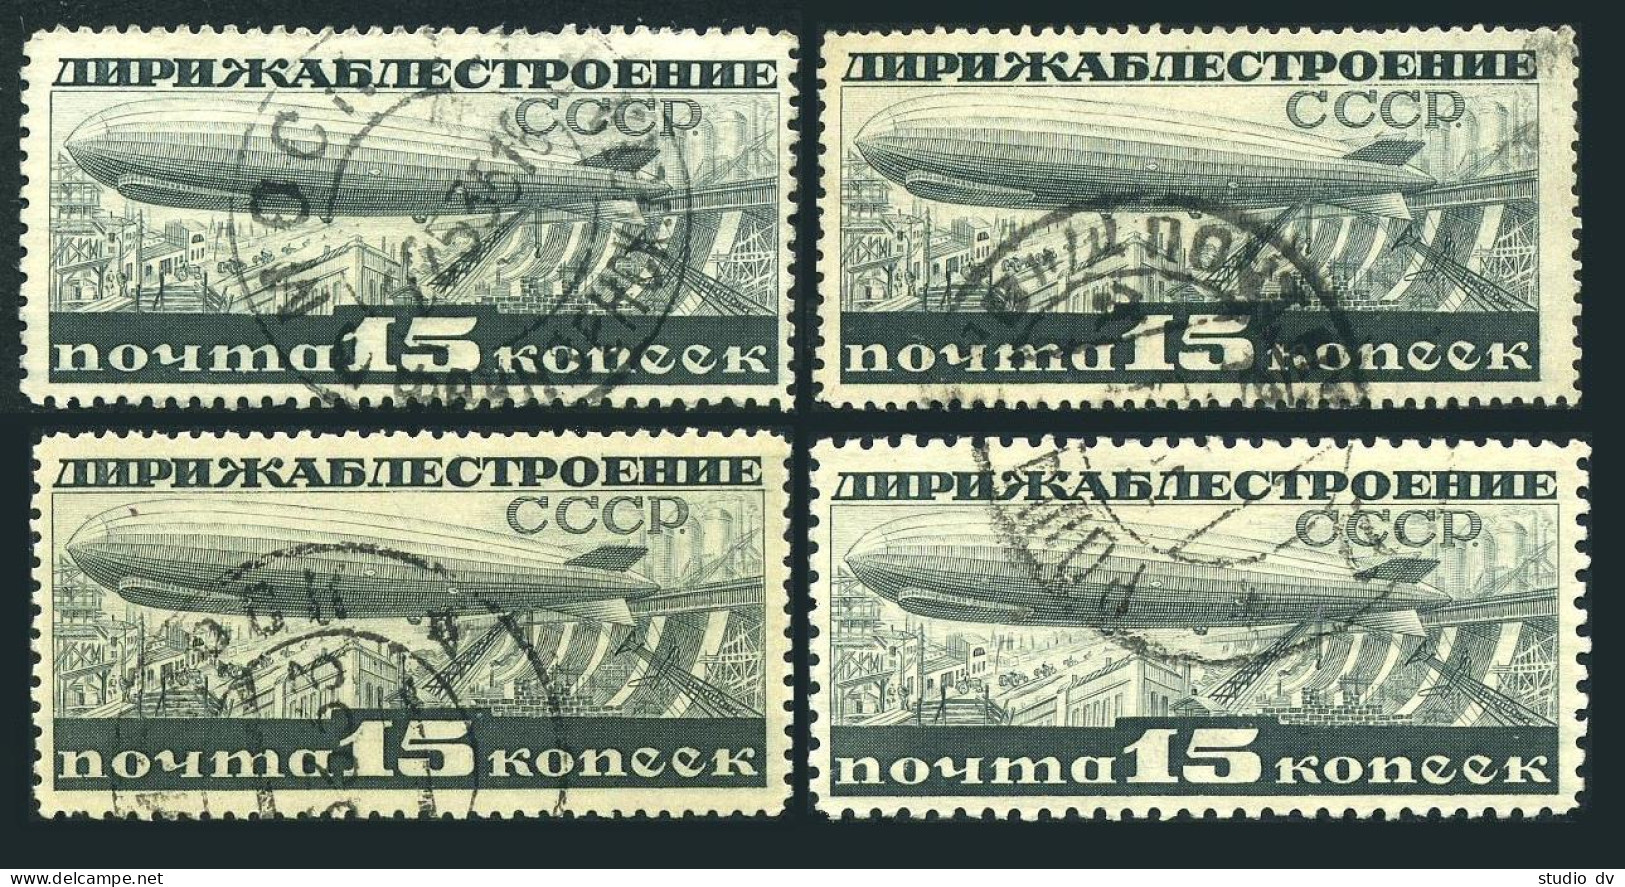 Russia C25 X2, C25a,C25b, CTO. Mi 406A,406B,406C. Airship-Dneprostroi Dam, 1932. - Used Stamps